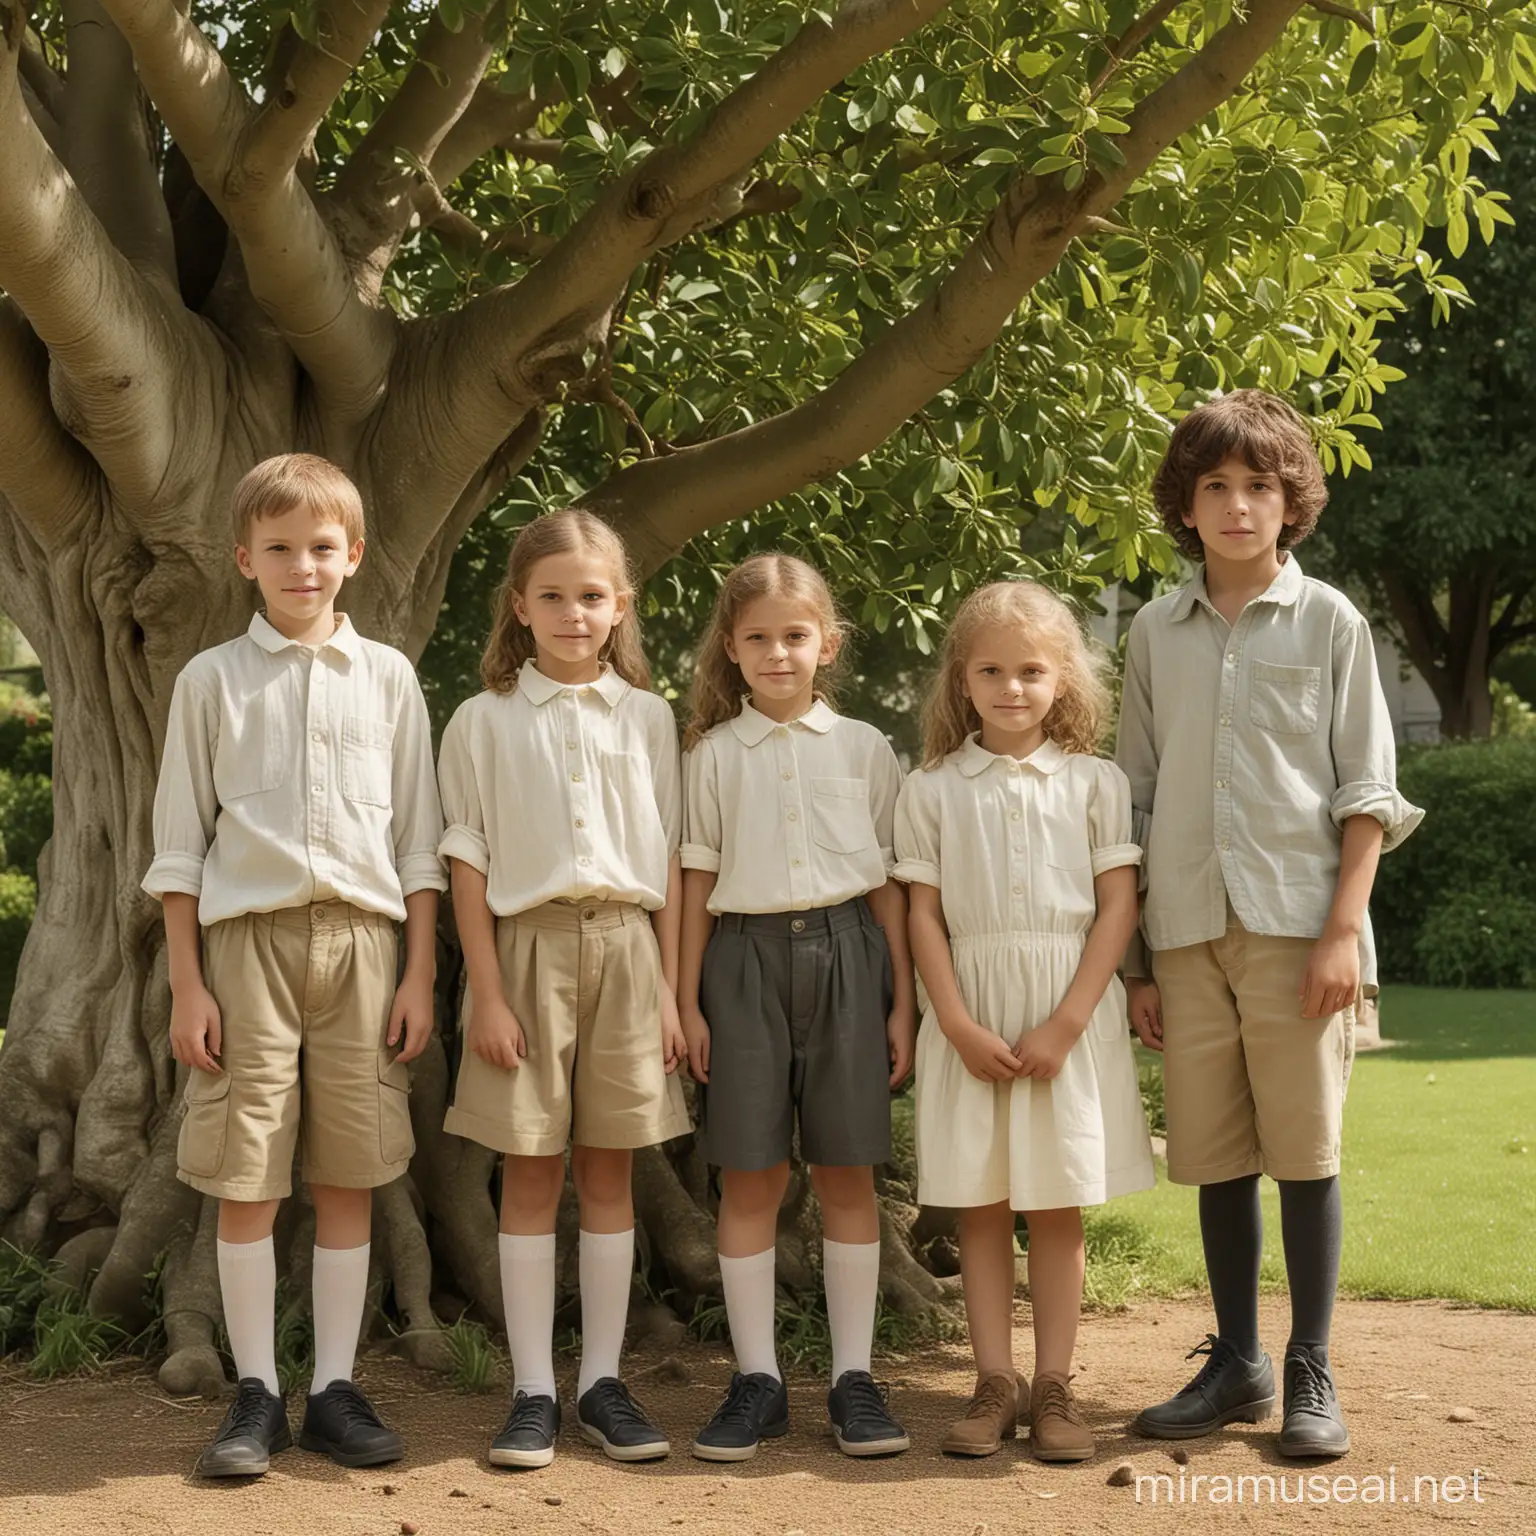 Children Standing in Garden by Old Lime Tree in Realistic Photograph Style